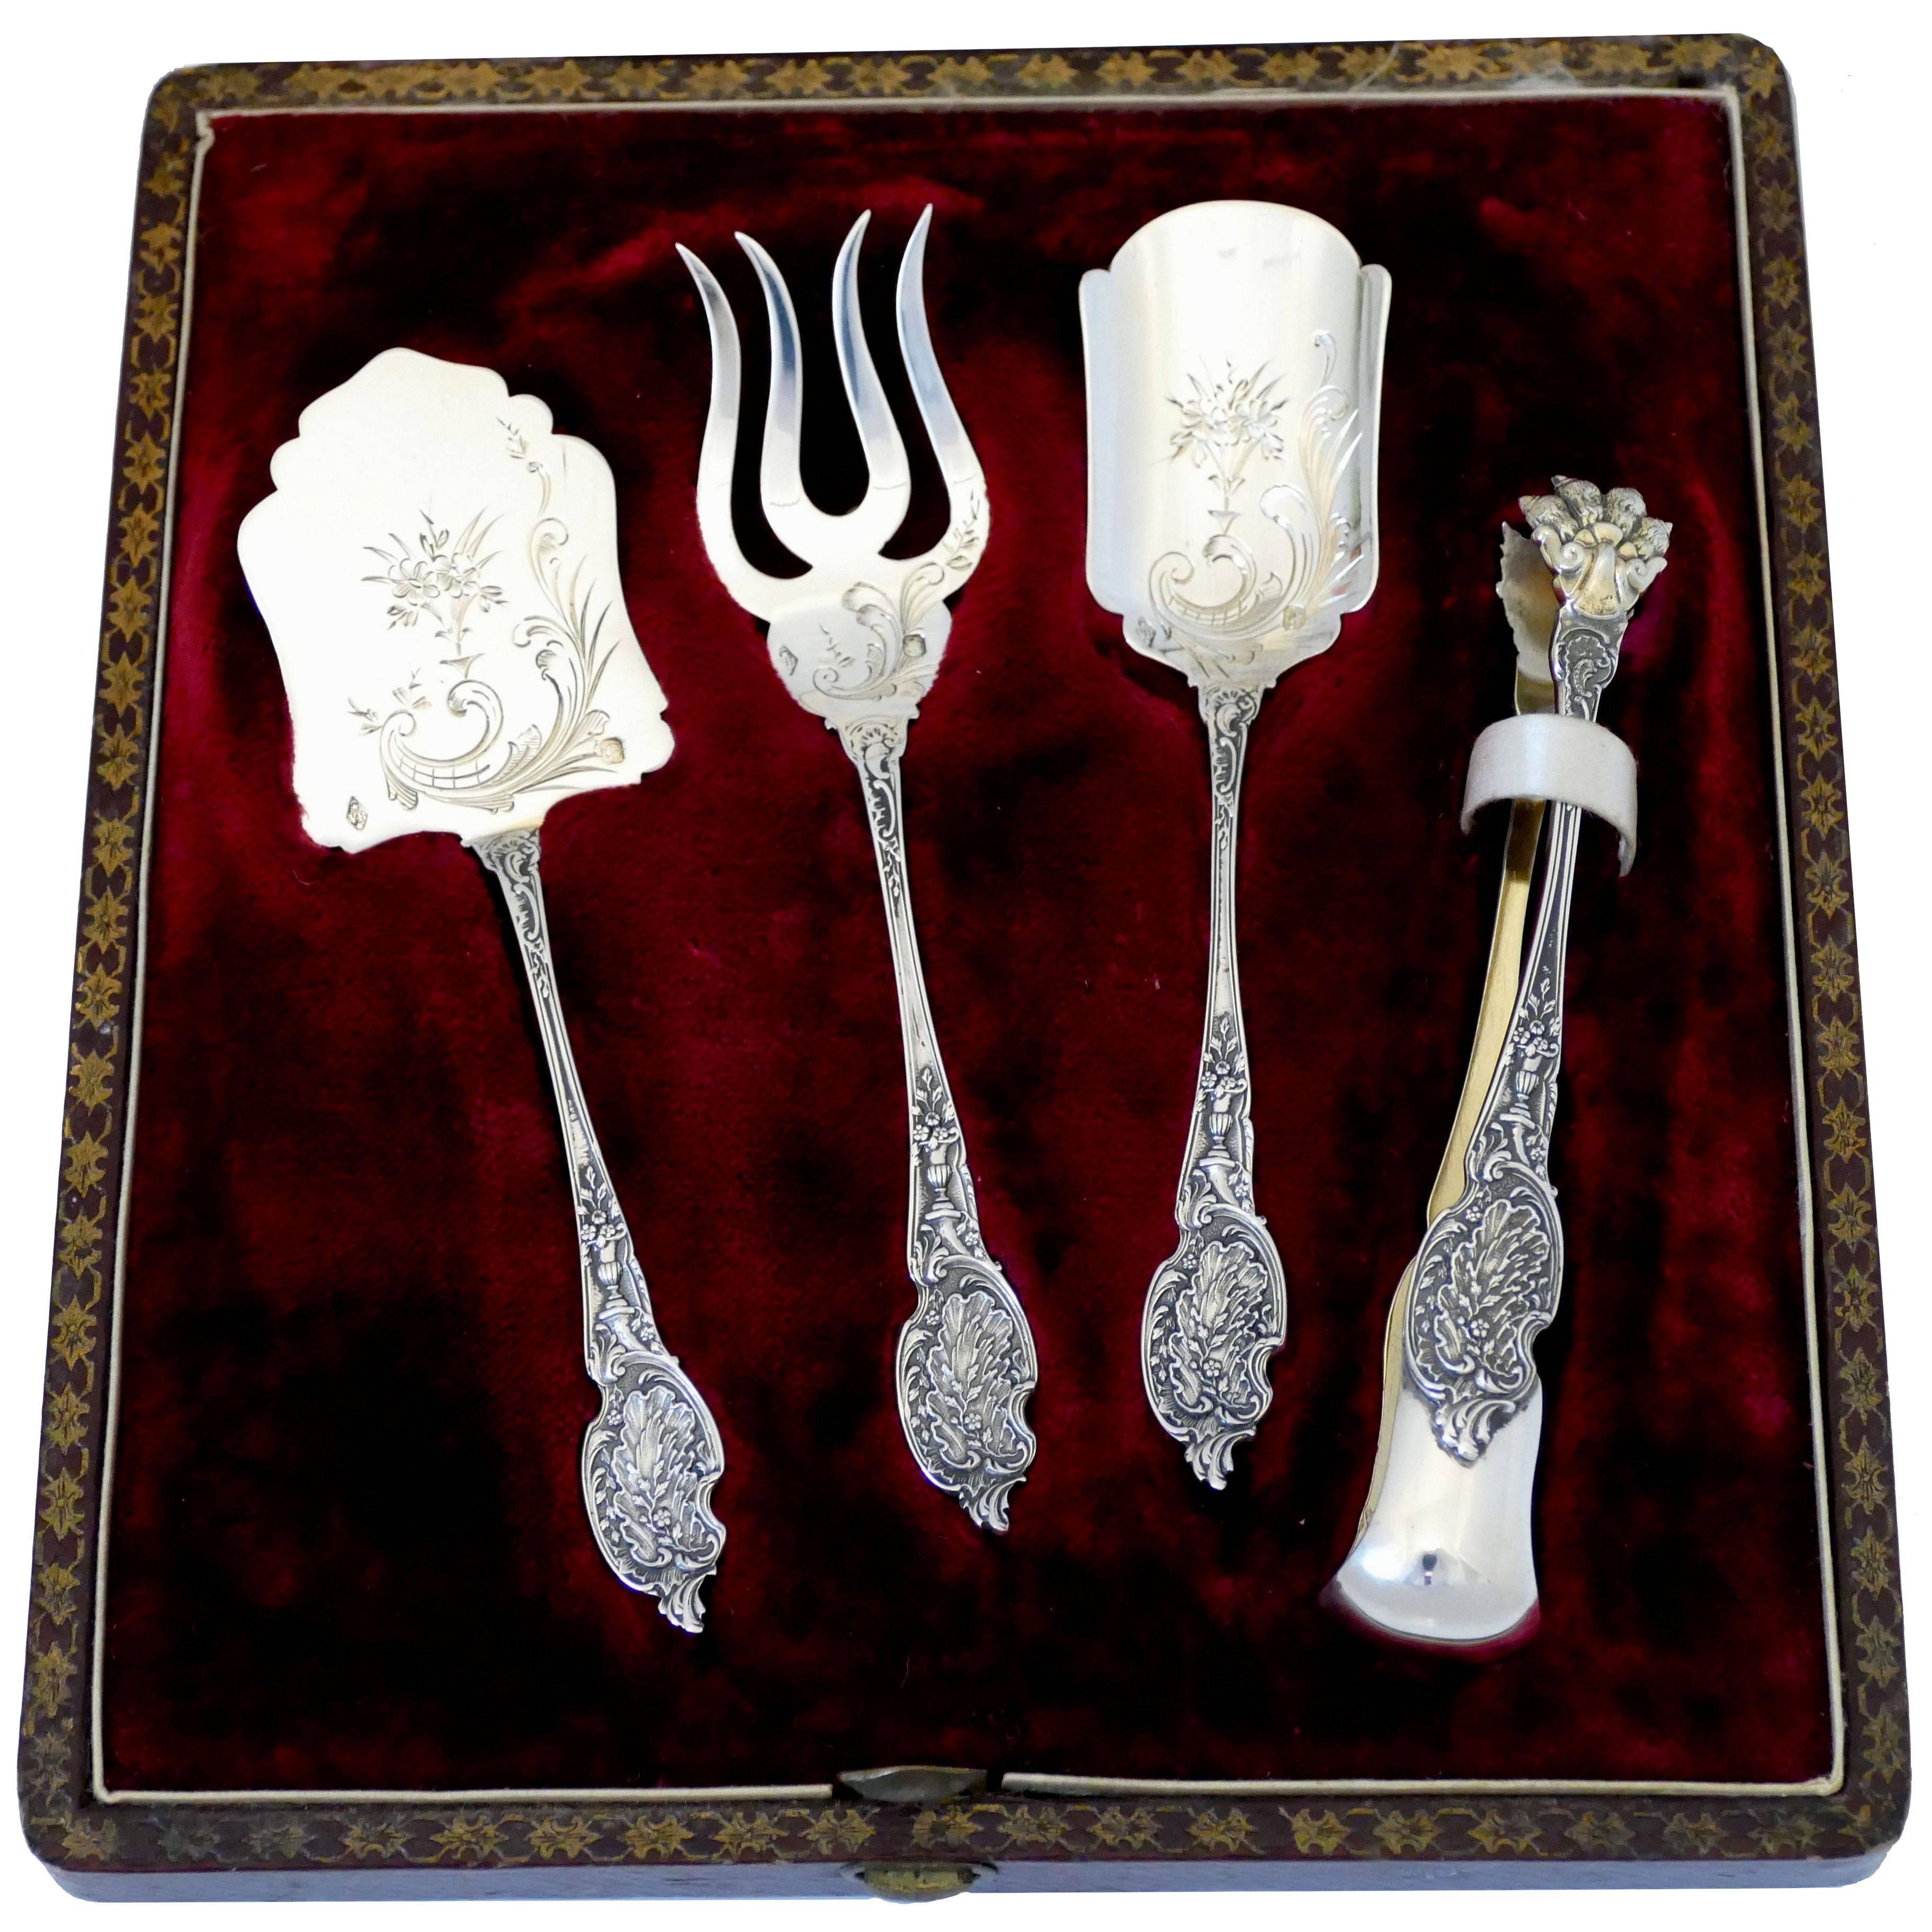 Boivin French Sterling Silver Dessert Hors D'oeuvre Set Four Pieces Original Box For Sale